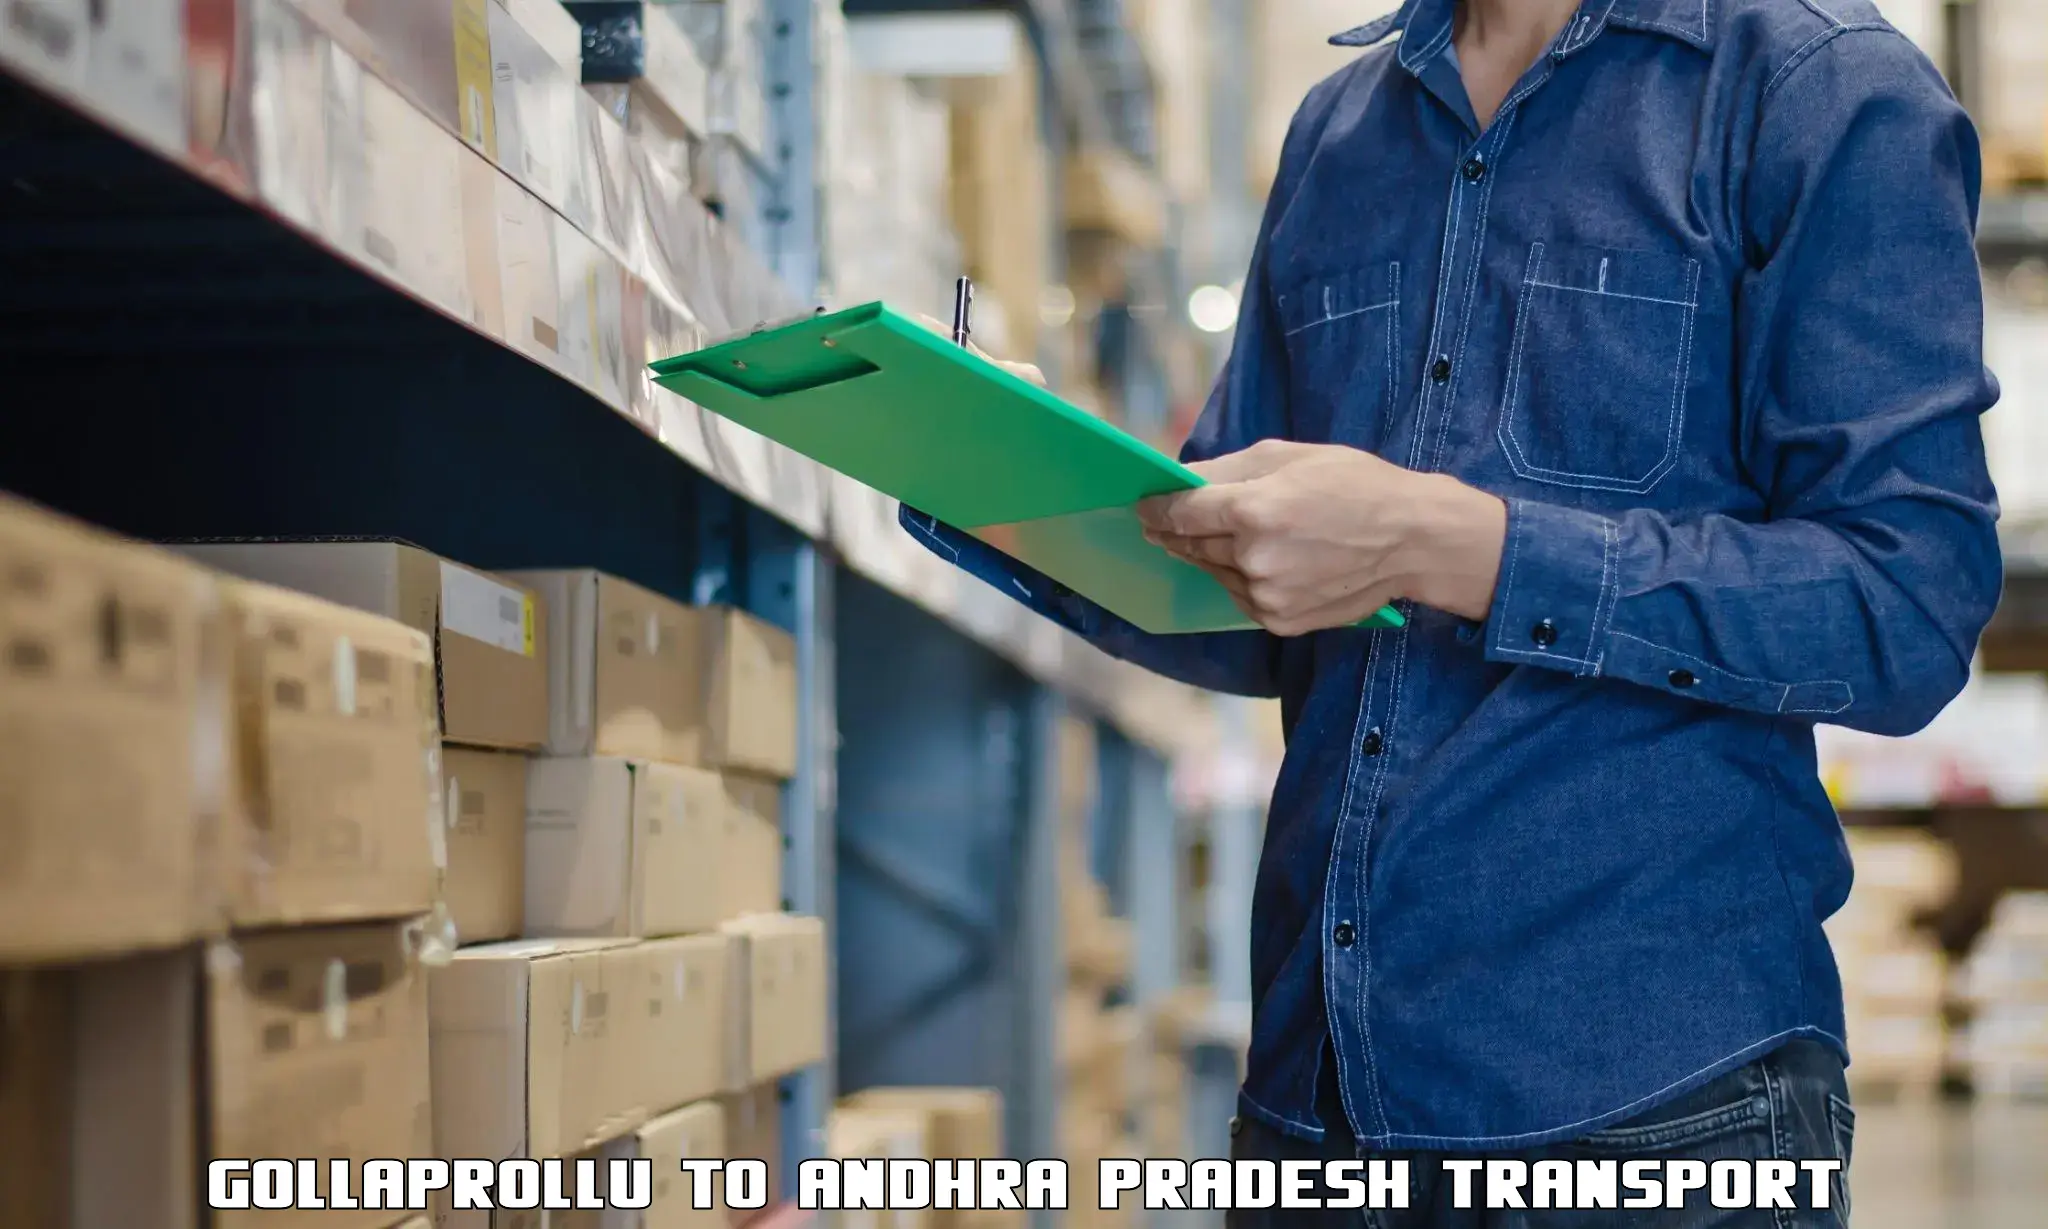 Package delivery services Gollaprollu to Porumamilla